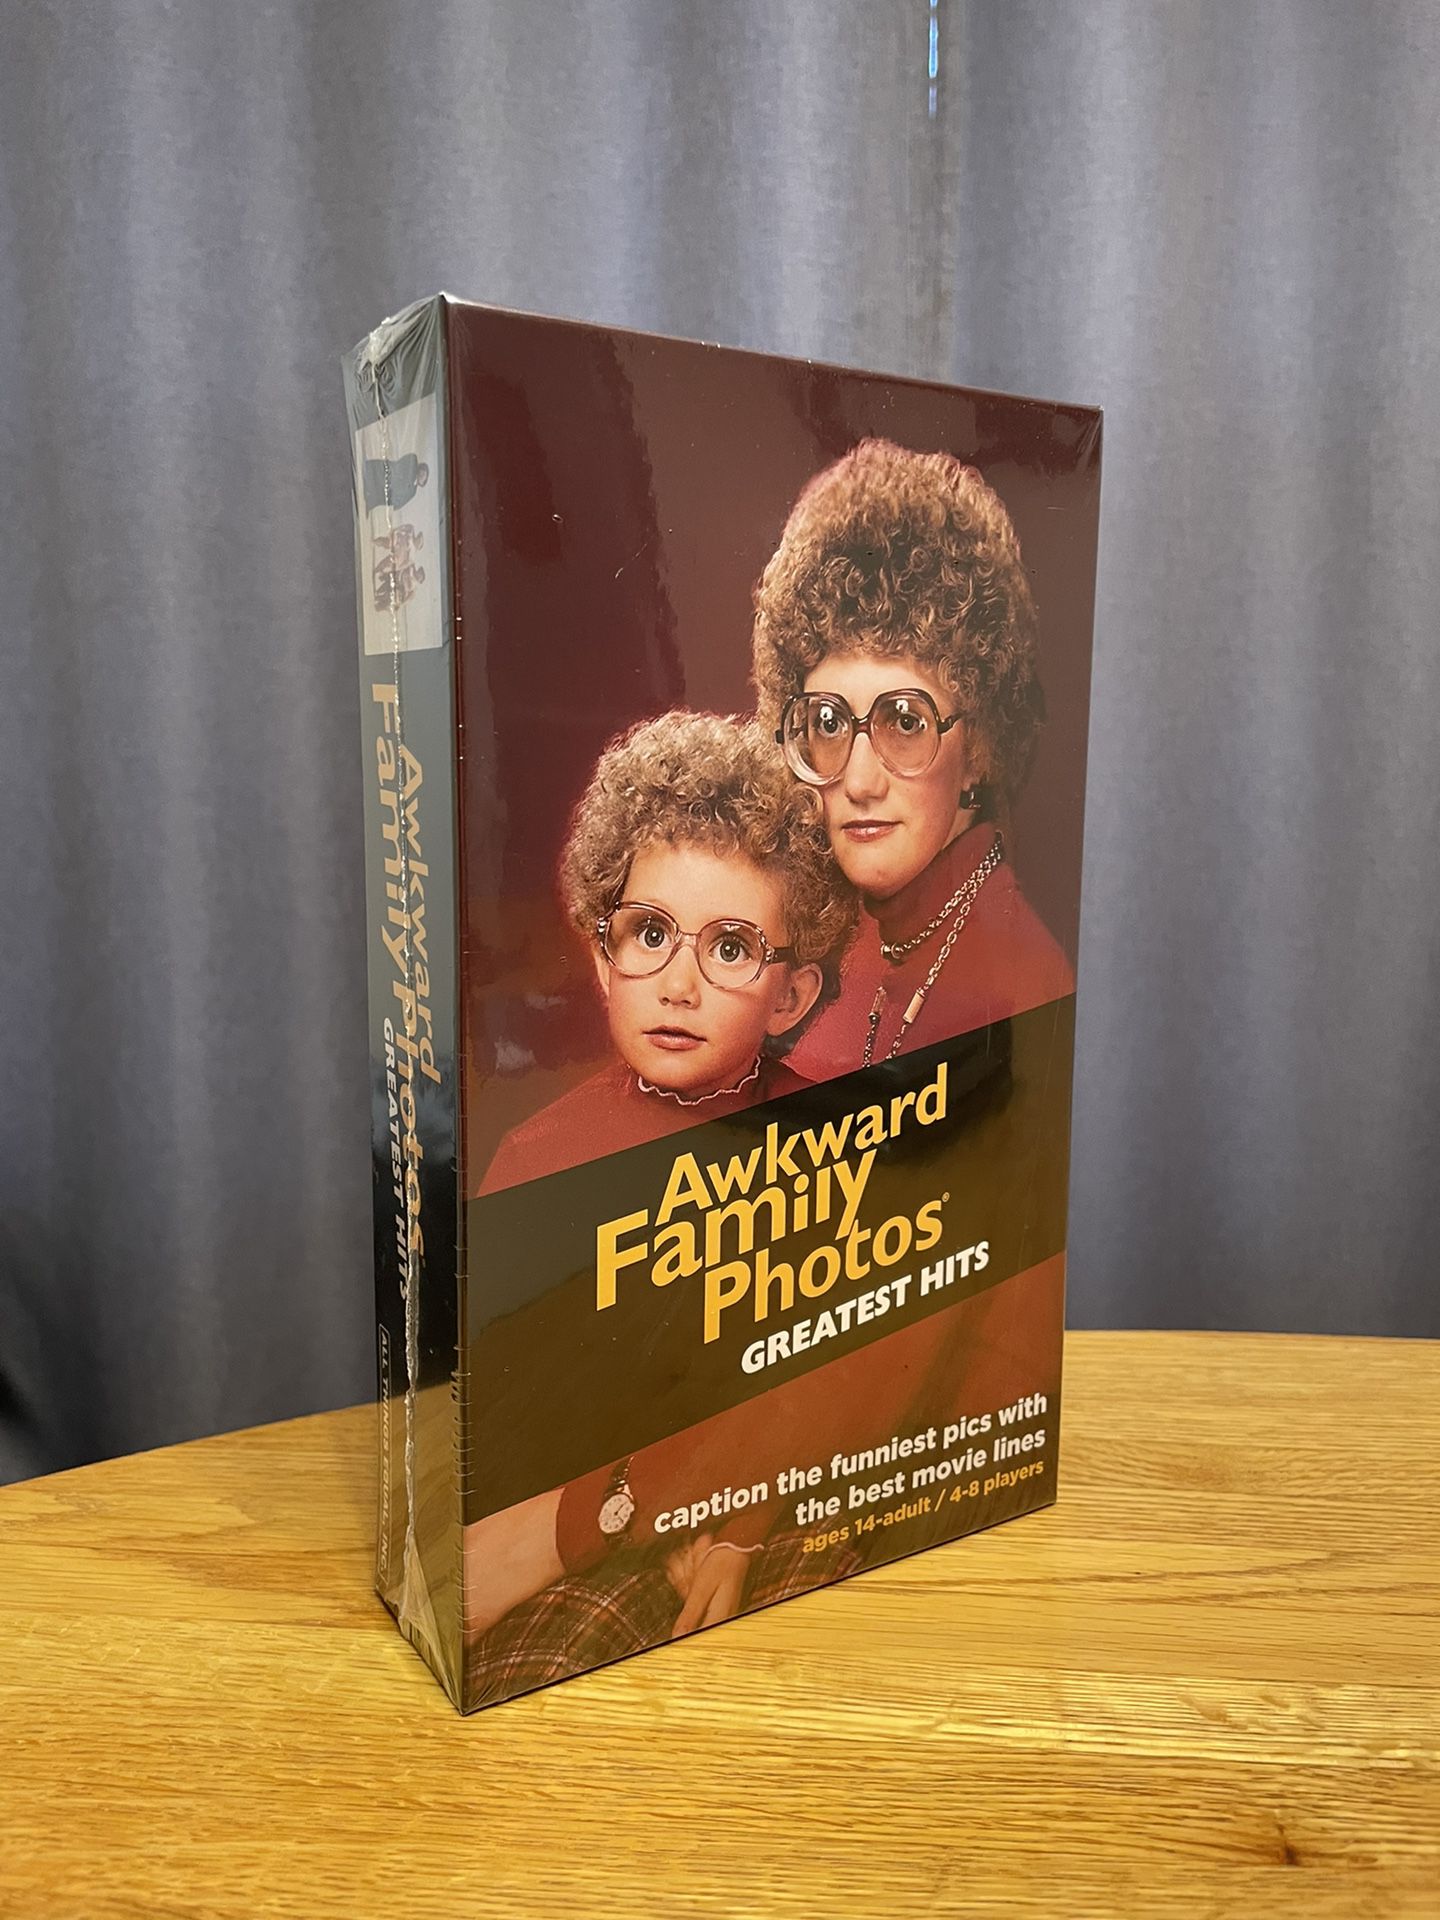 Awkward Family Photos Greatest Hits Card Game - Brand New, Still in Shrink Wrap